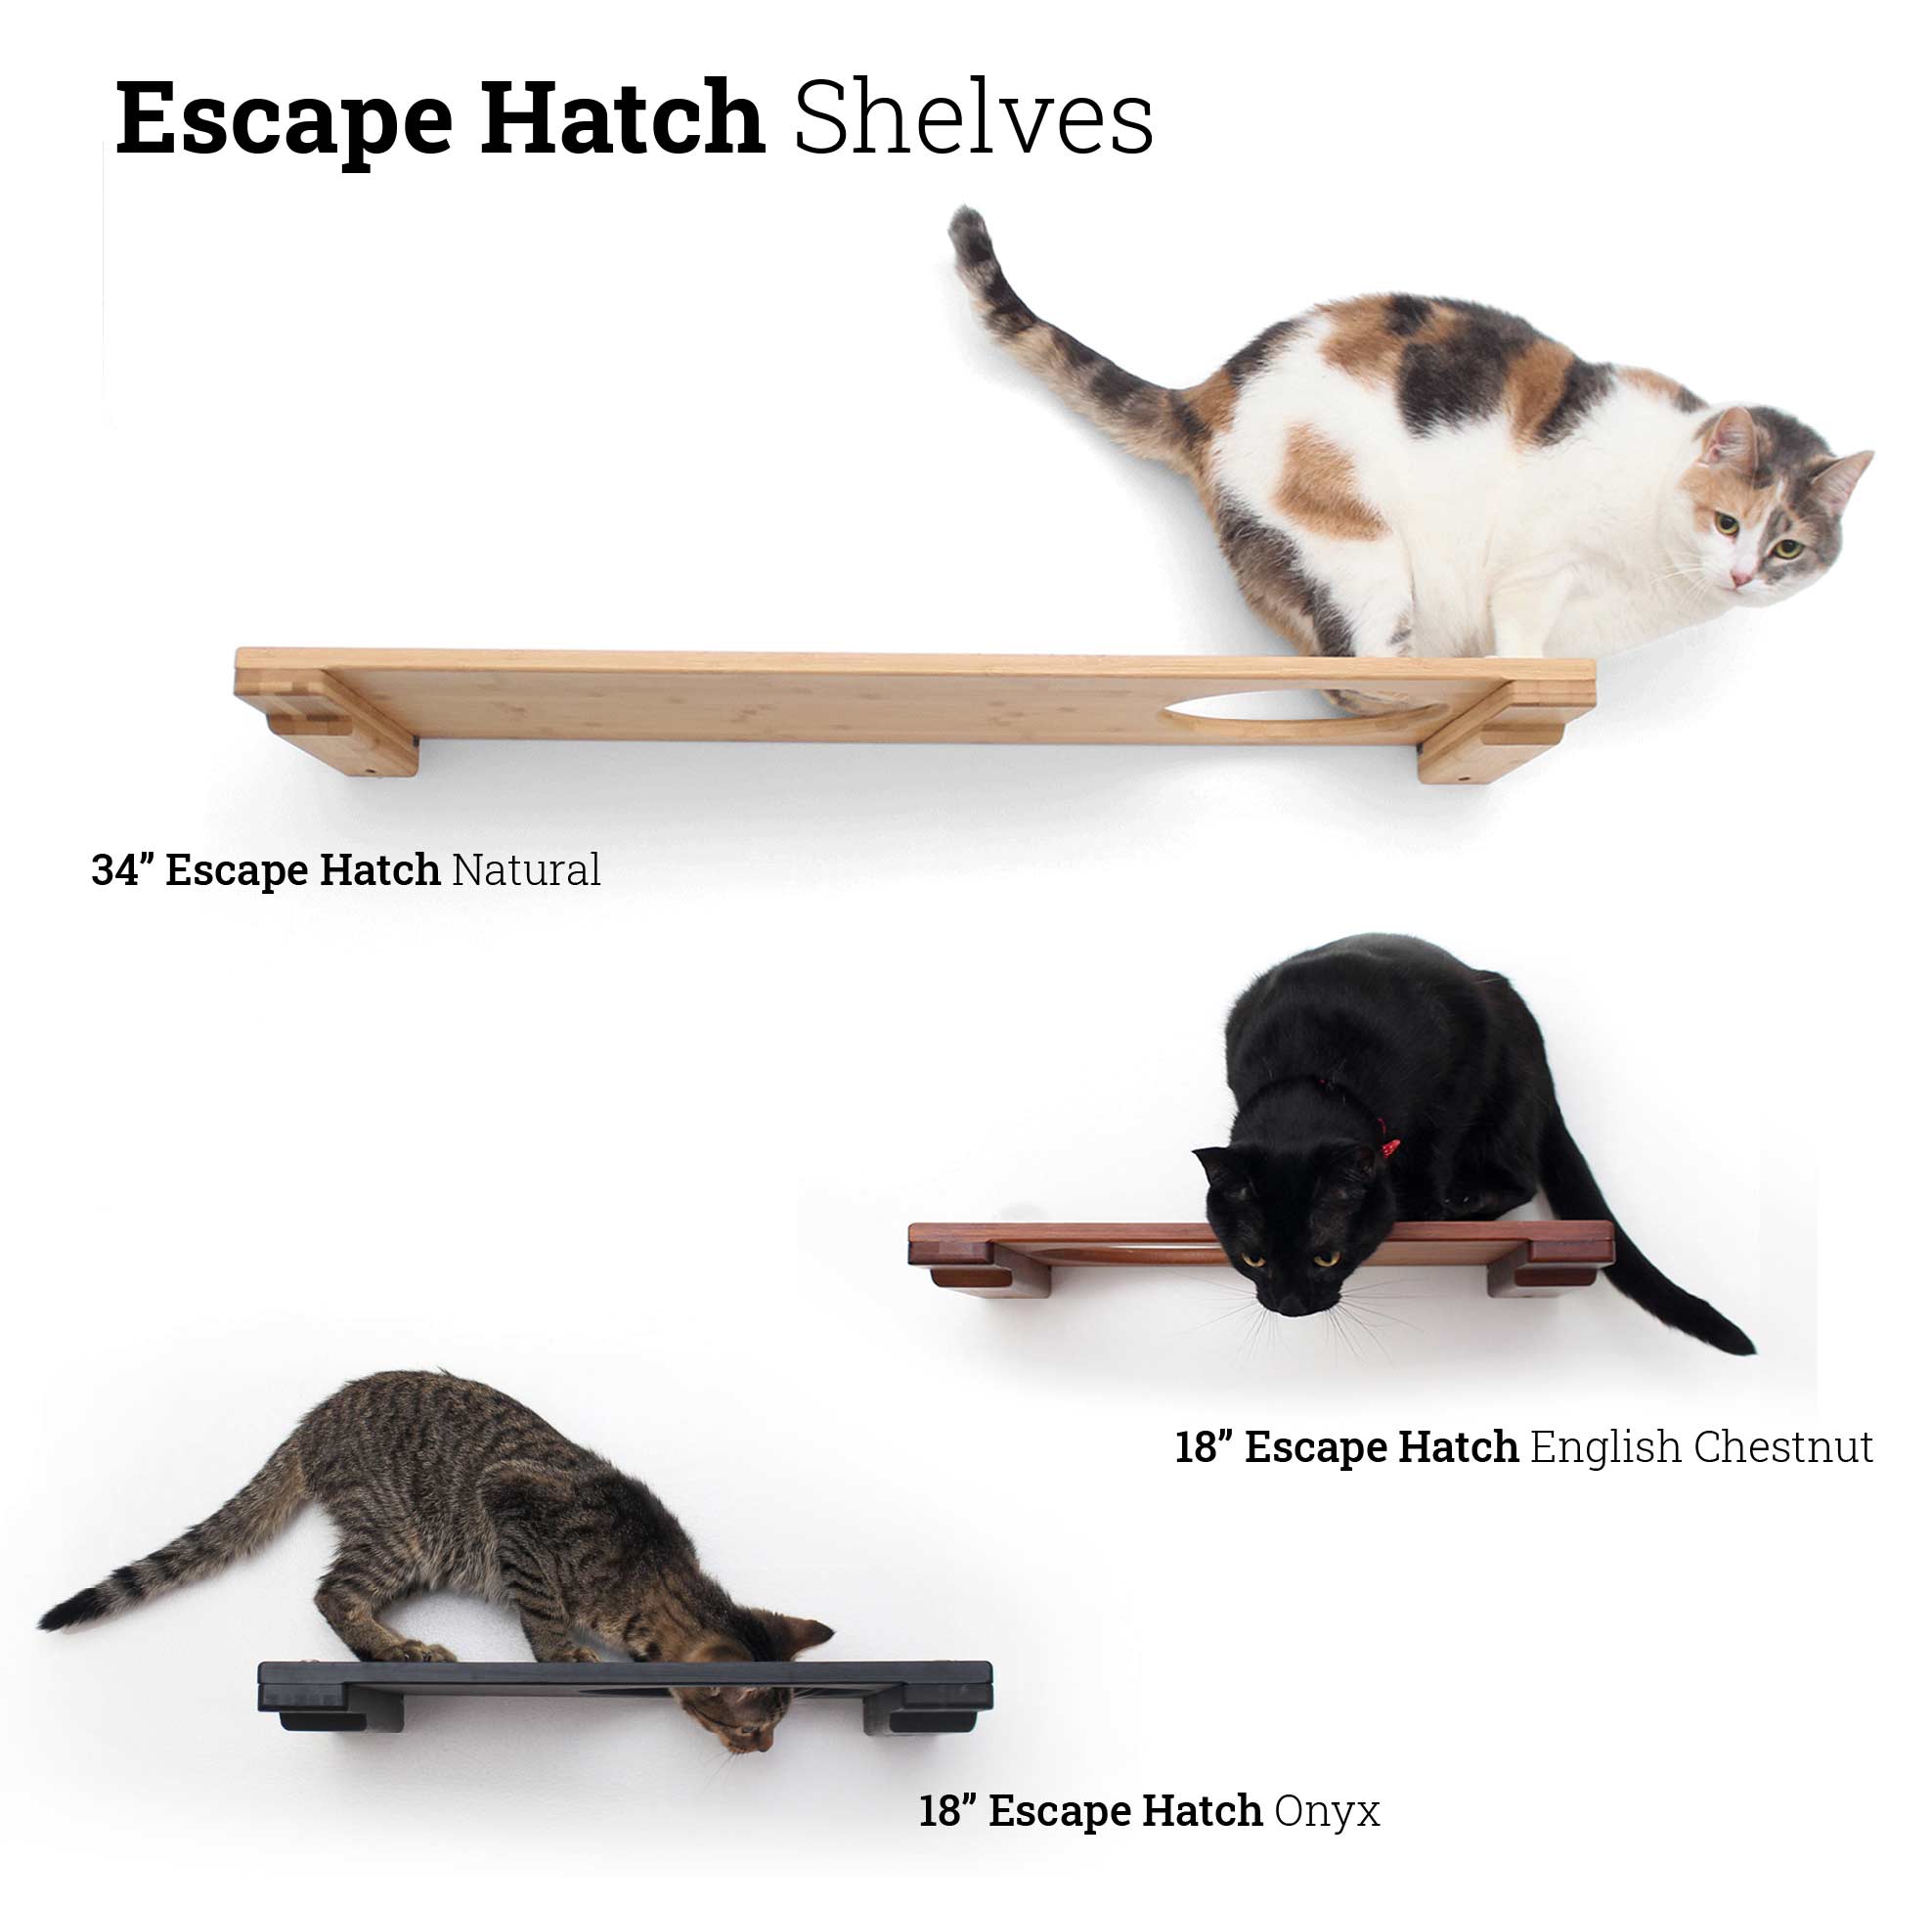 Cats posing on multiple variations of the Escape Hatch cat shelves